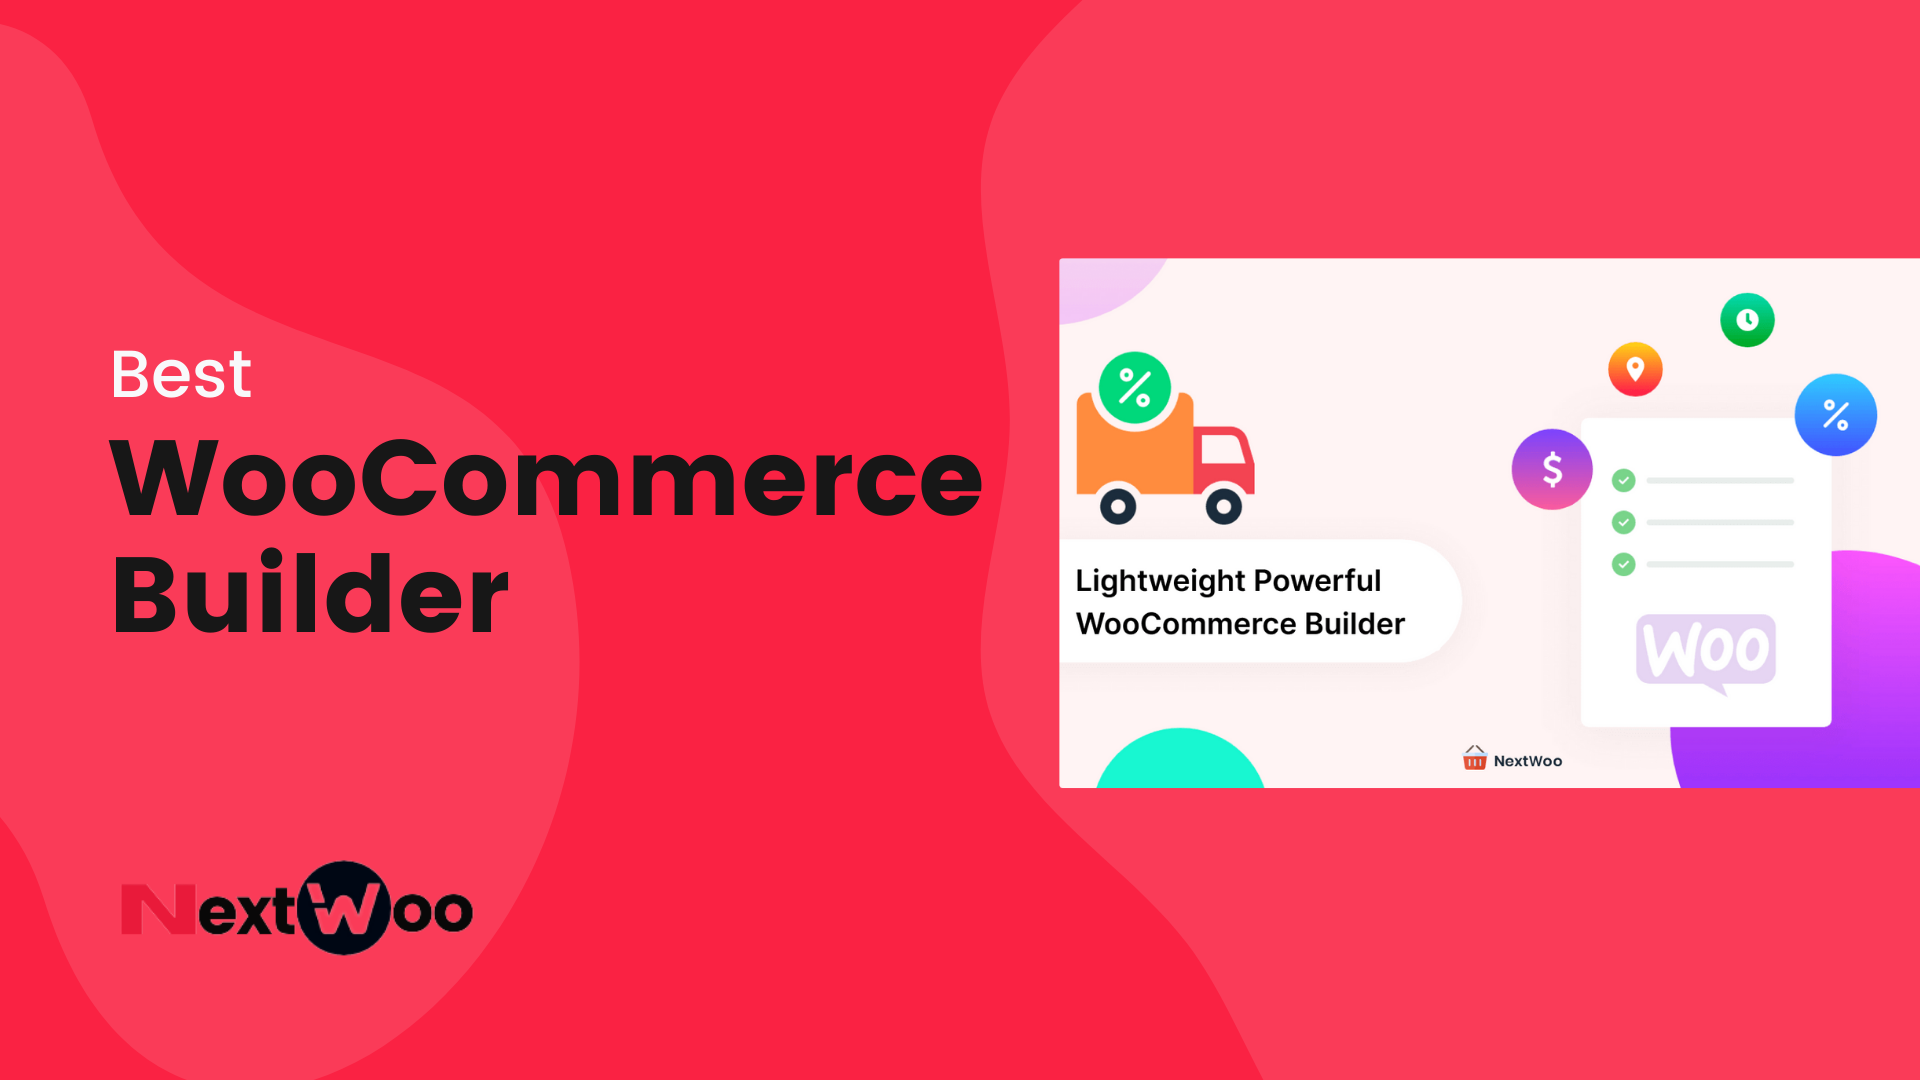 How to Choose the Best WooCommerce Builder